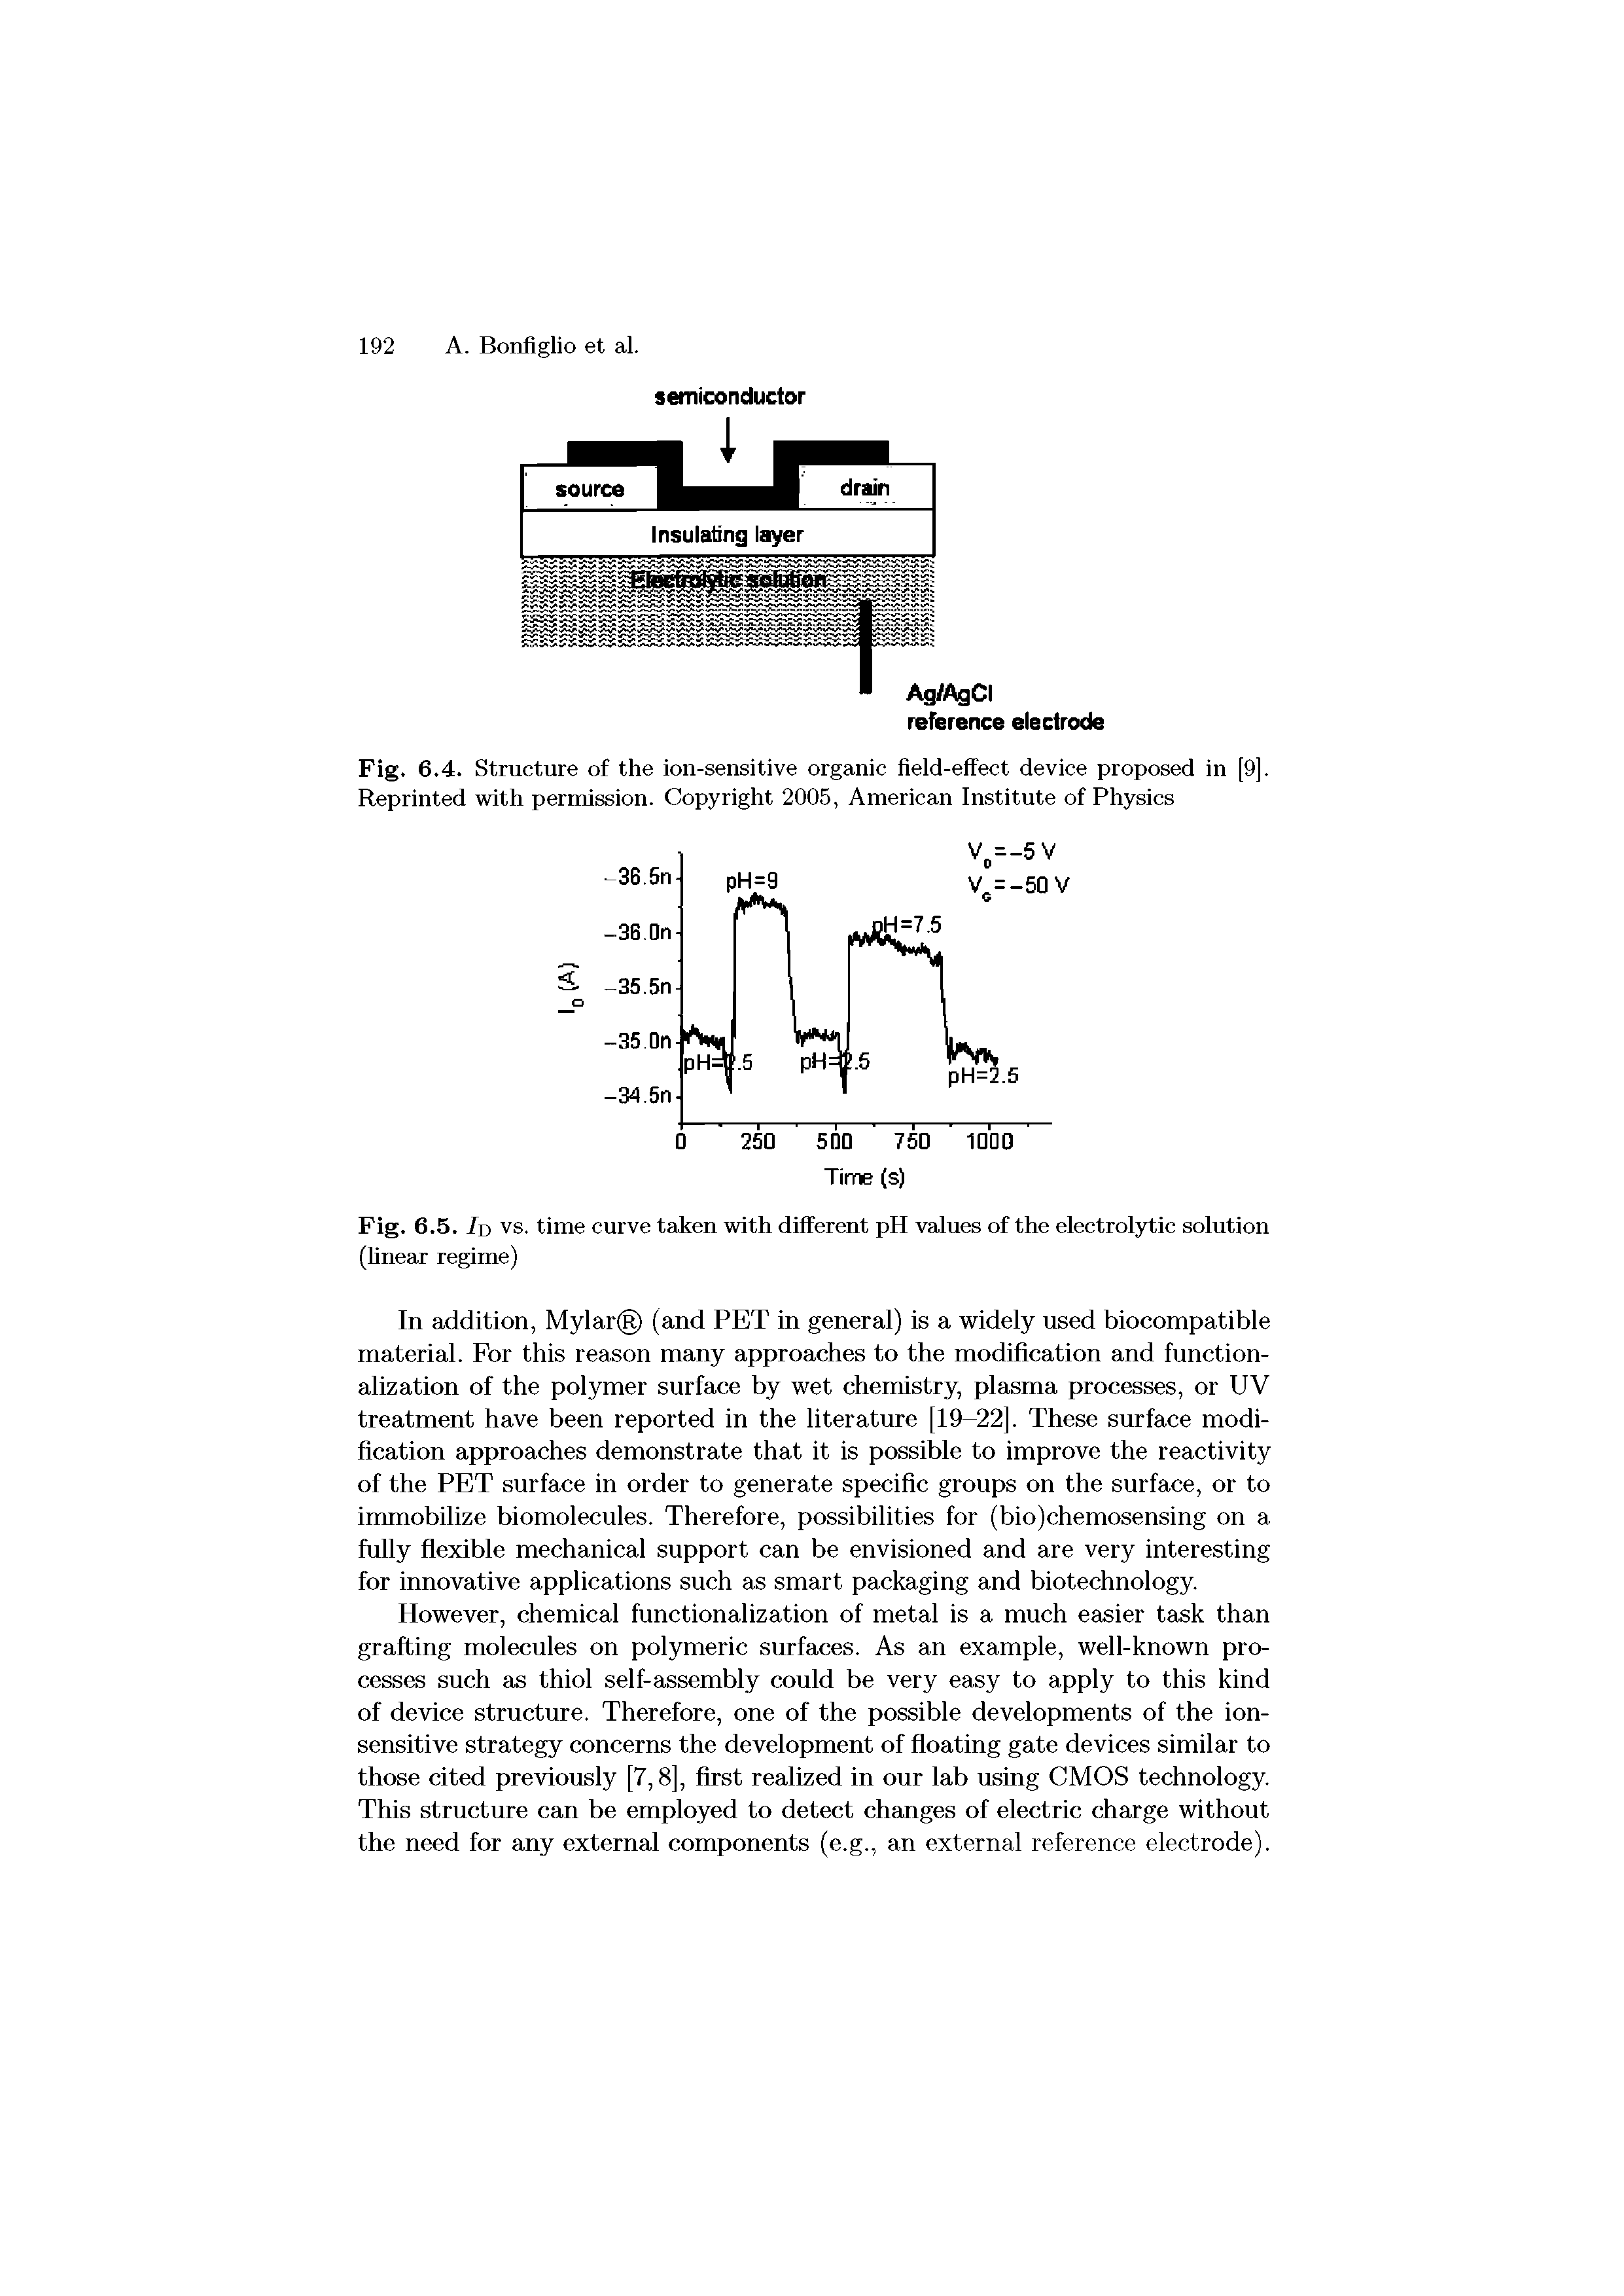 Fig. 6.4. Structure of the ion-sensitive organic field-effect device proposed in [9]. Reprinted with permission. Copyright 2005, American Institute of Physics...